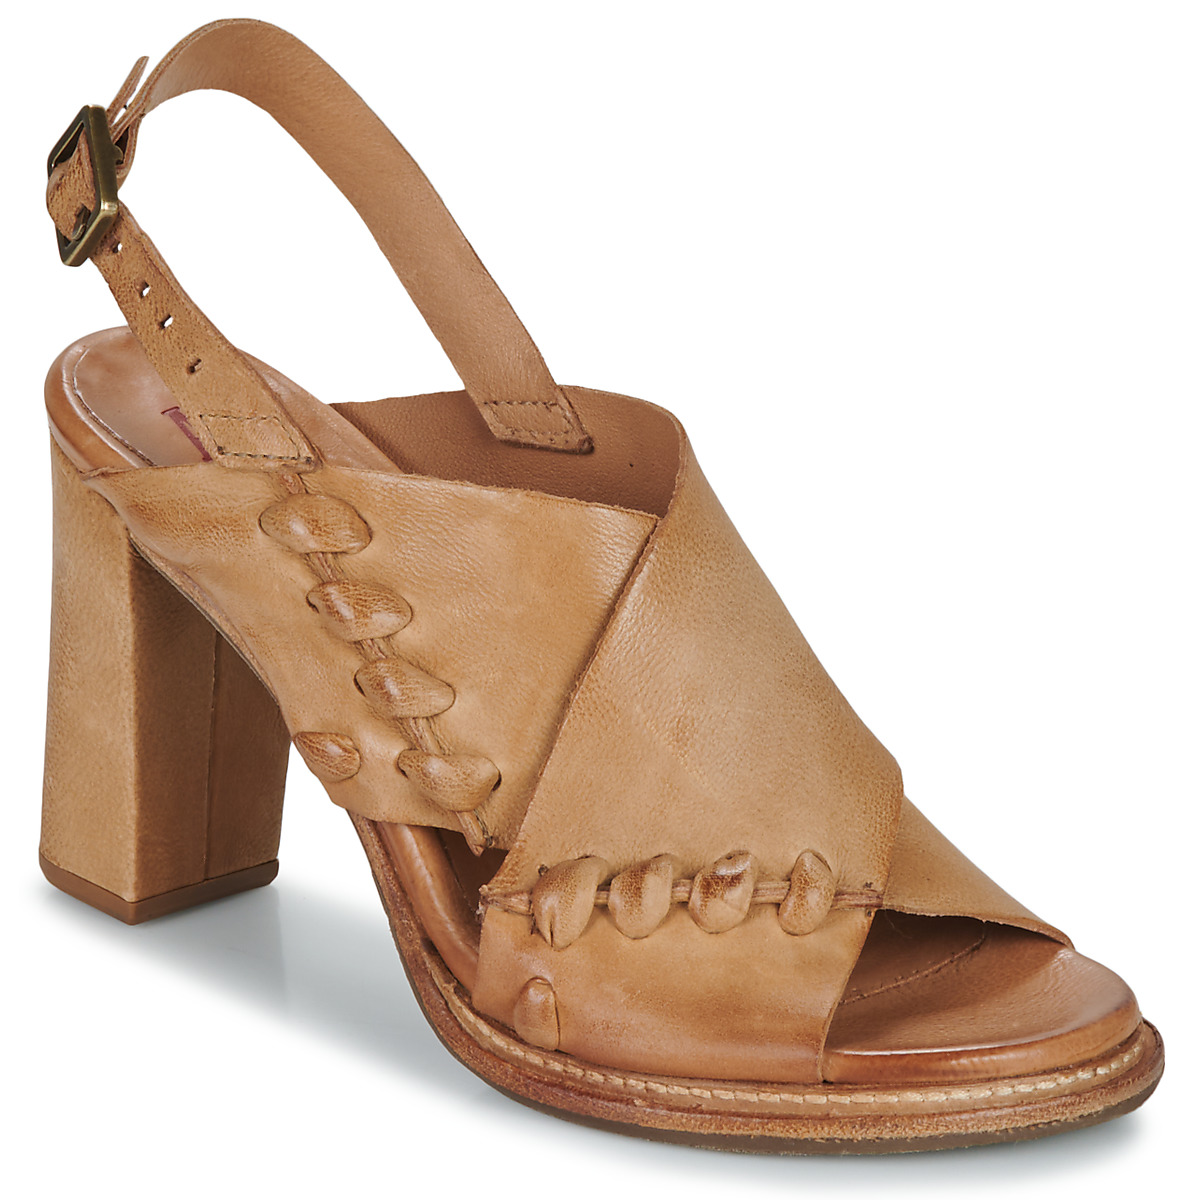 airstep / a.s.98  basile couture  women's sandals in beige